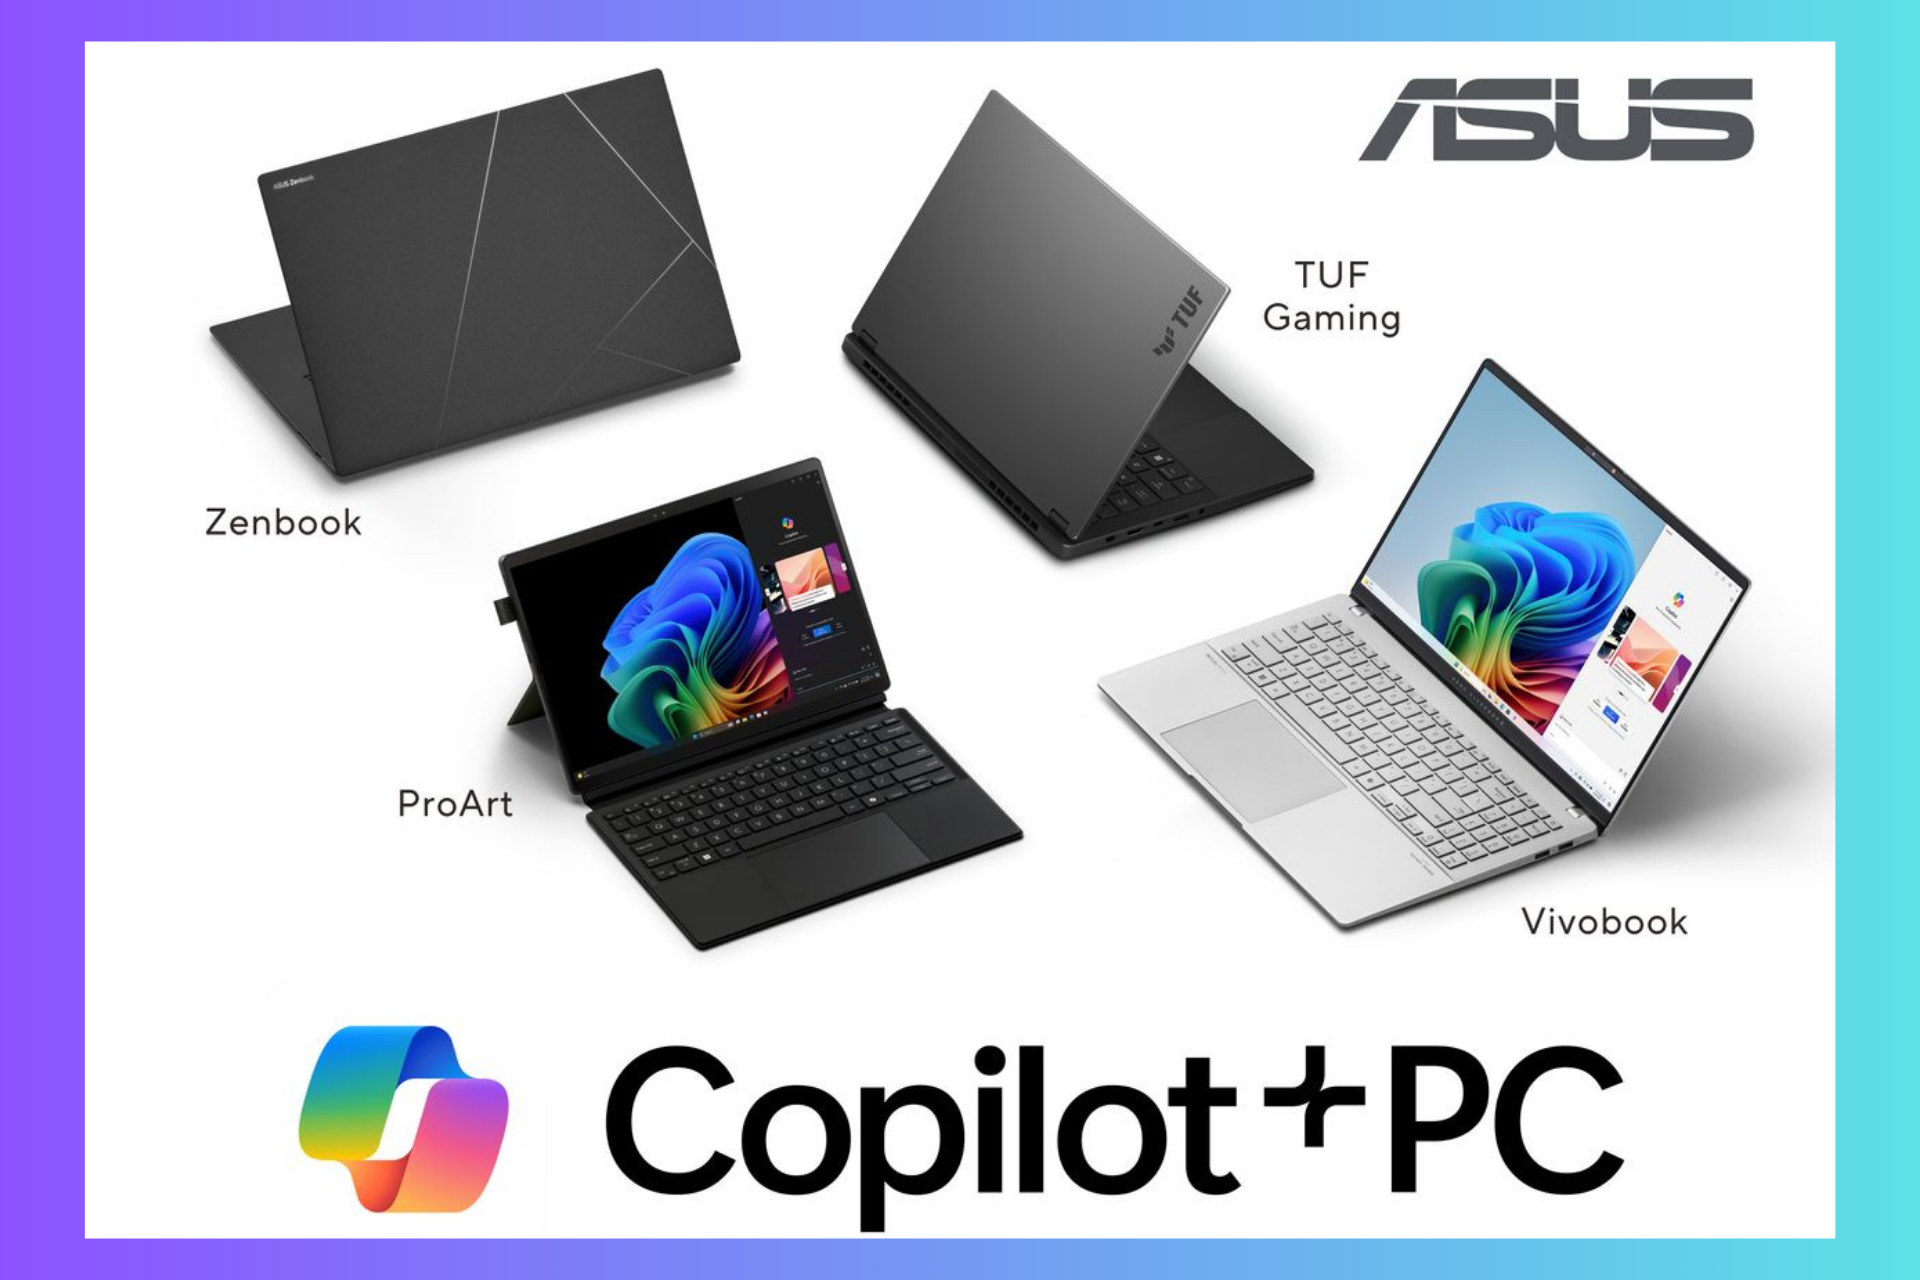 ASUS announced their new Copilot+ PC lineup